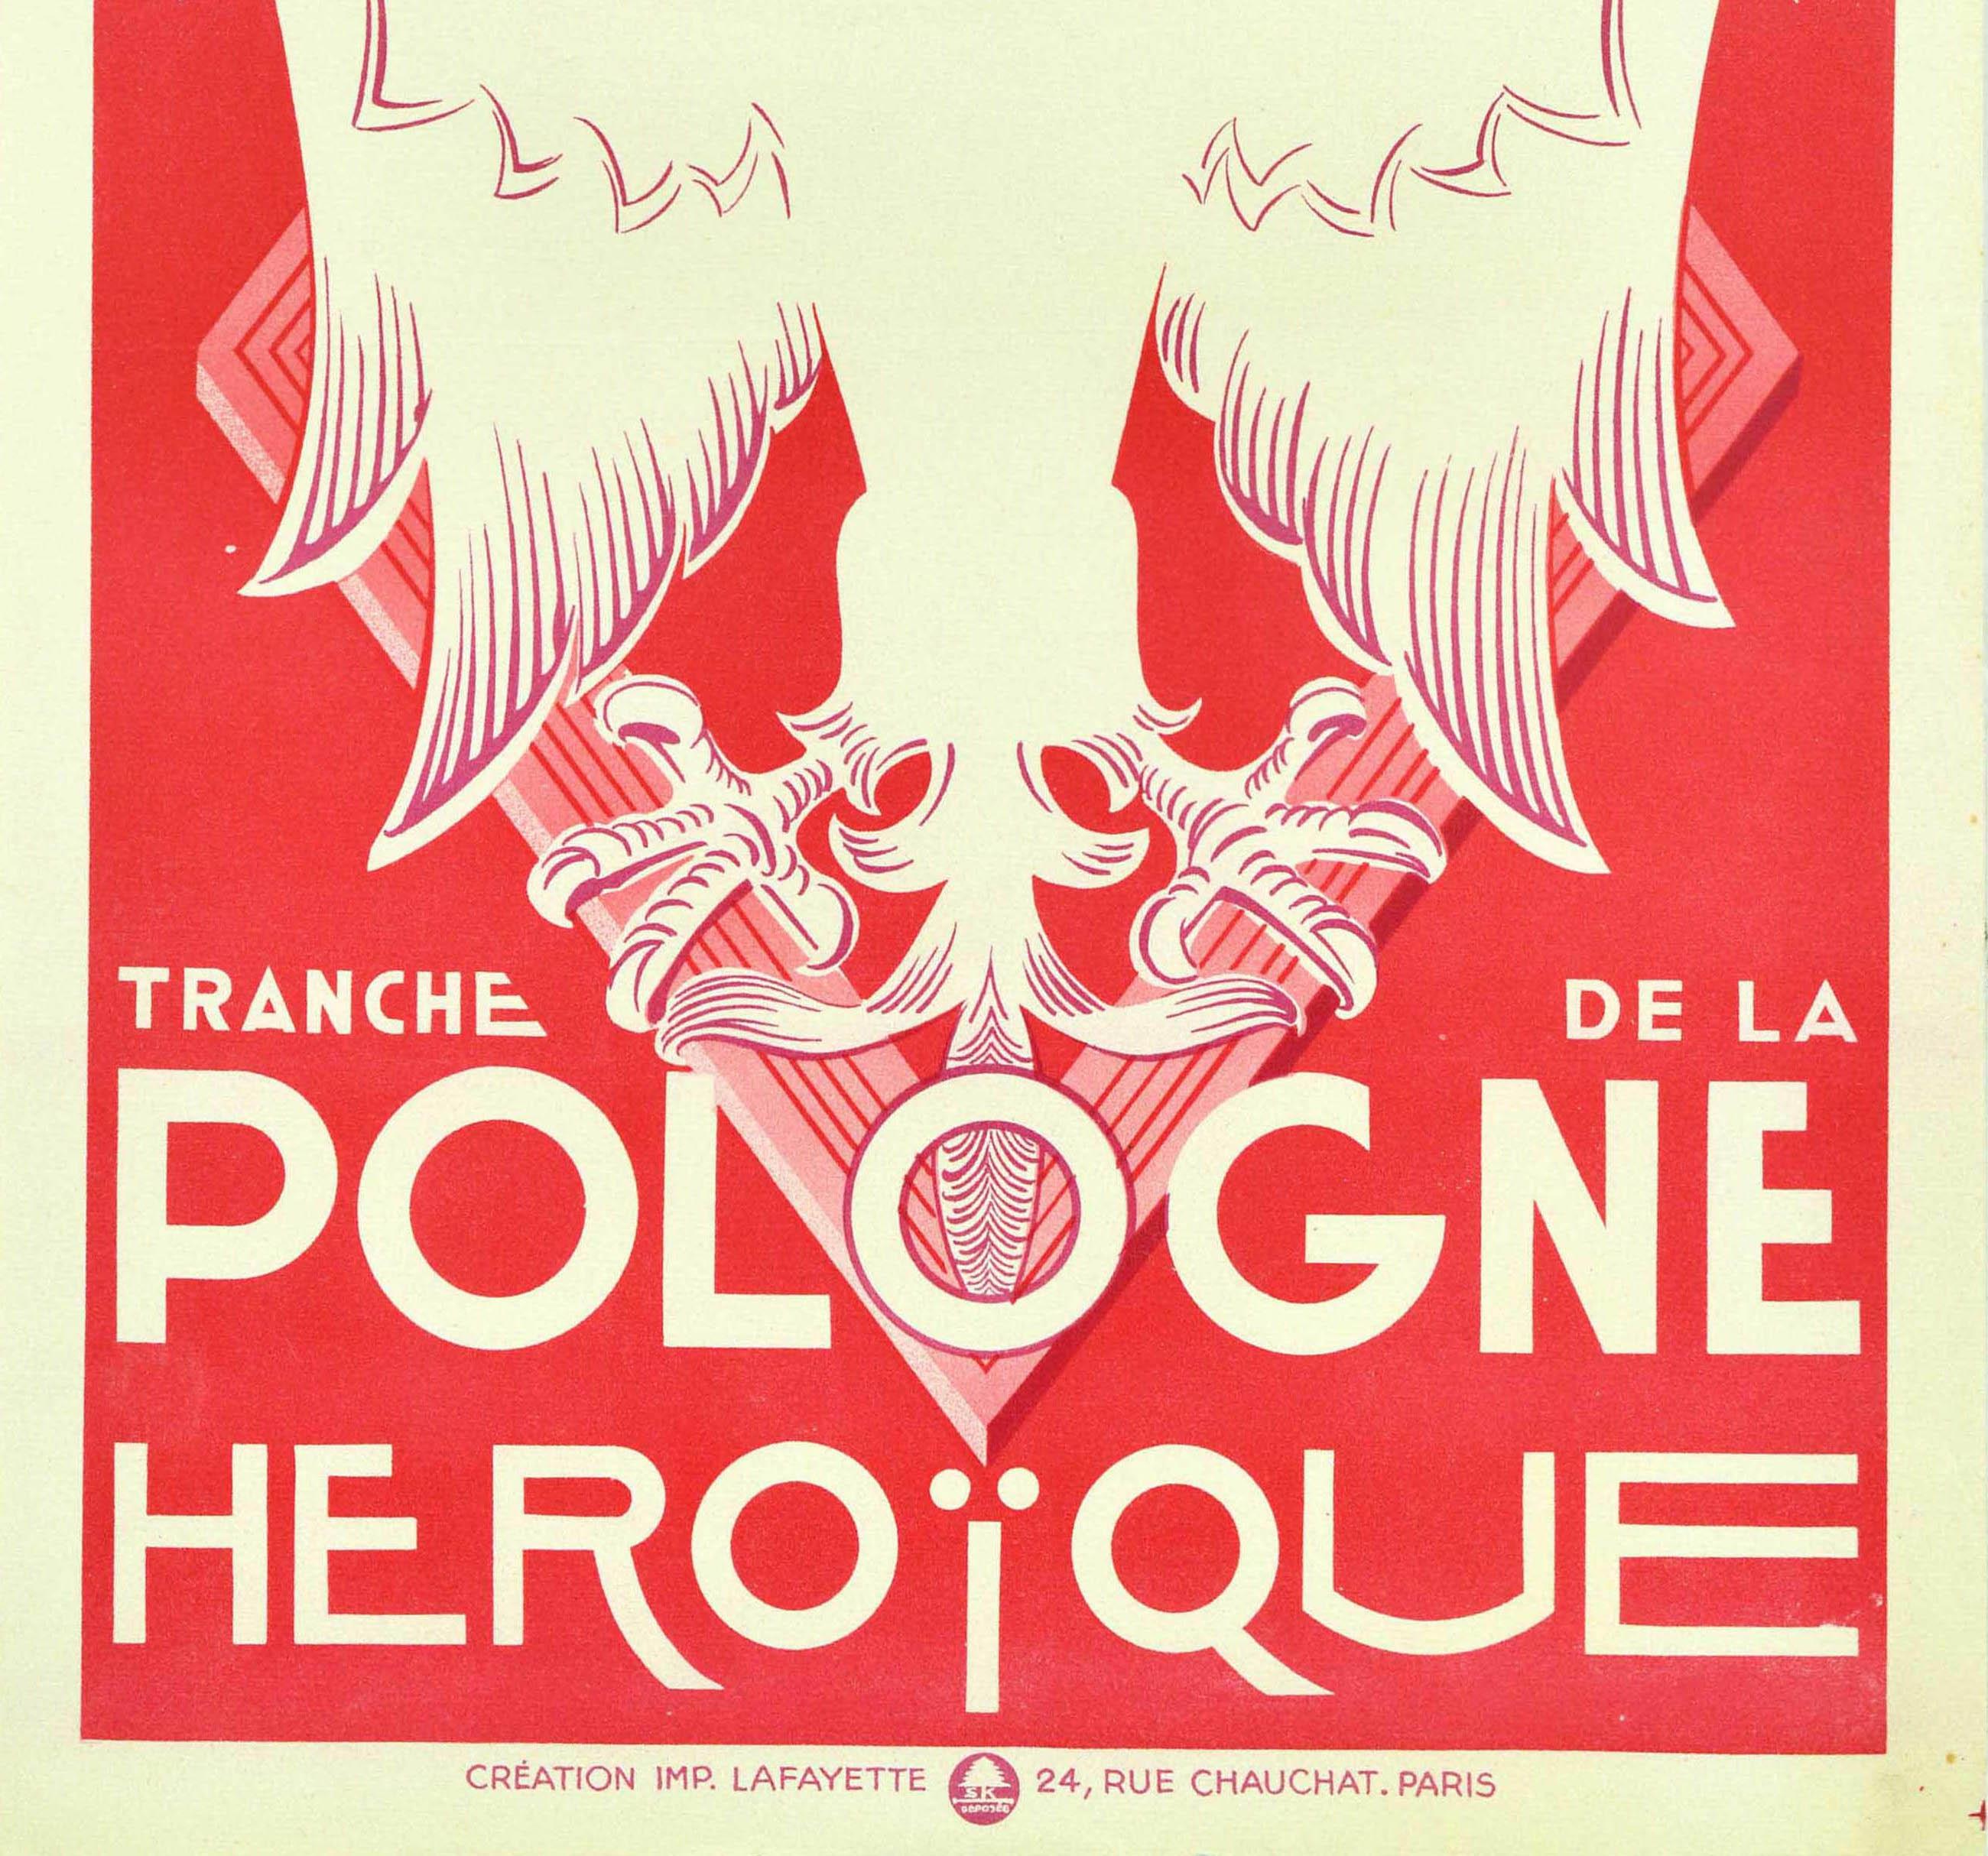 Original Vintage Advertising Poster National Lottery Heroic Poland Pologne Eagle In Good Condition For Sale In London, GB